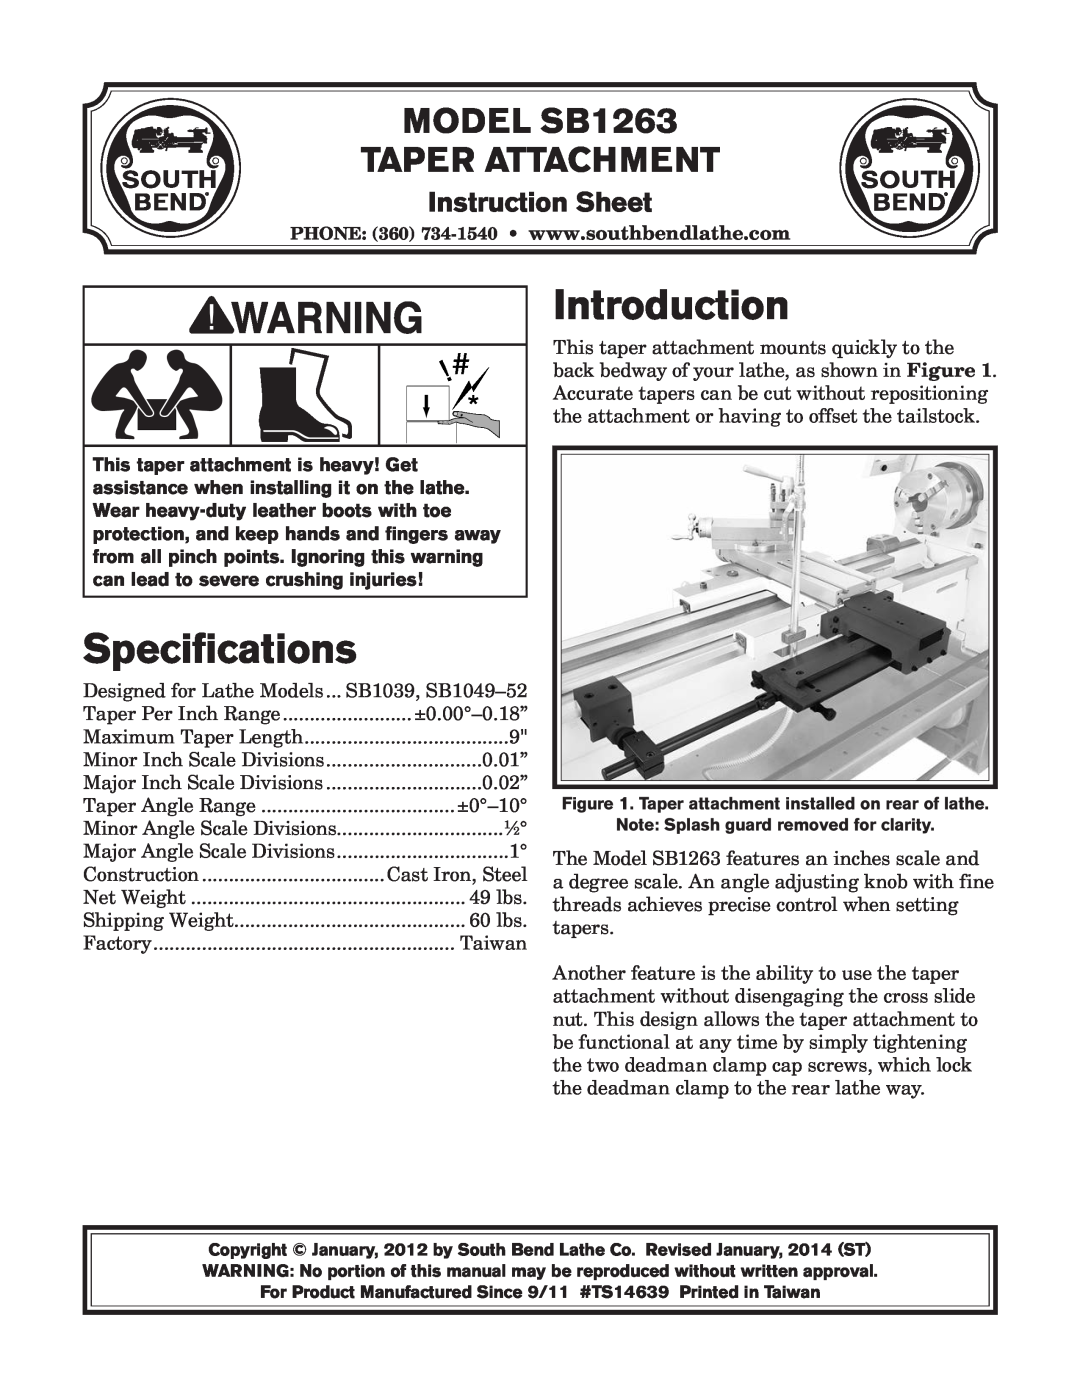 Southbend instruction sheet Specifications, Introduction, Instruction Sheet, MODEL SB1263 TAPER ATTACHMENT 